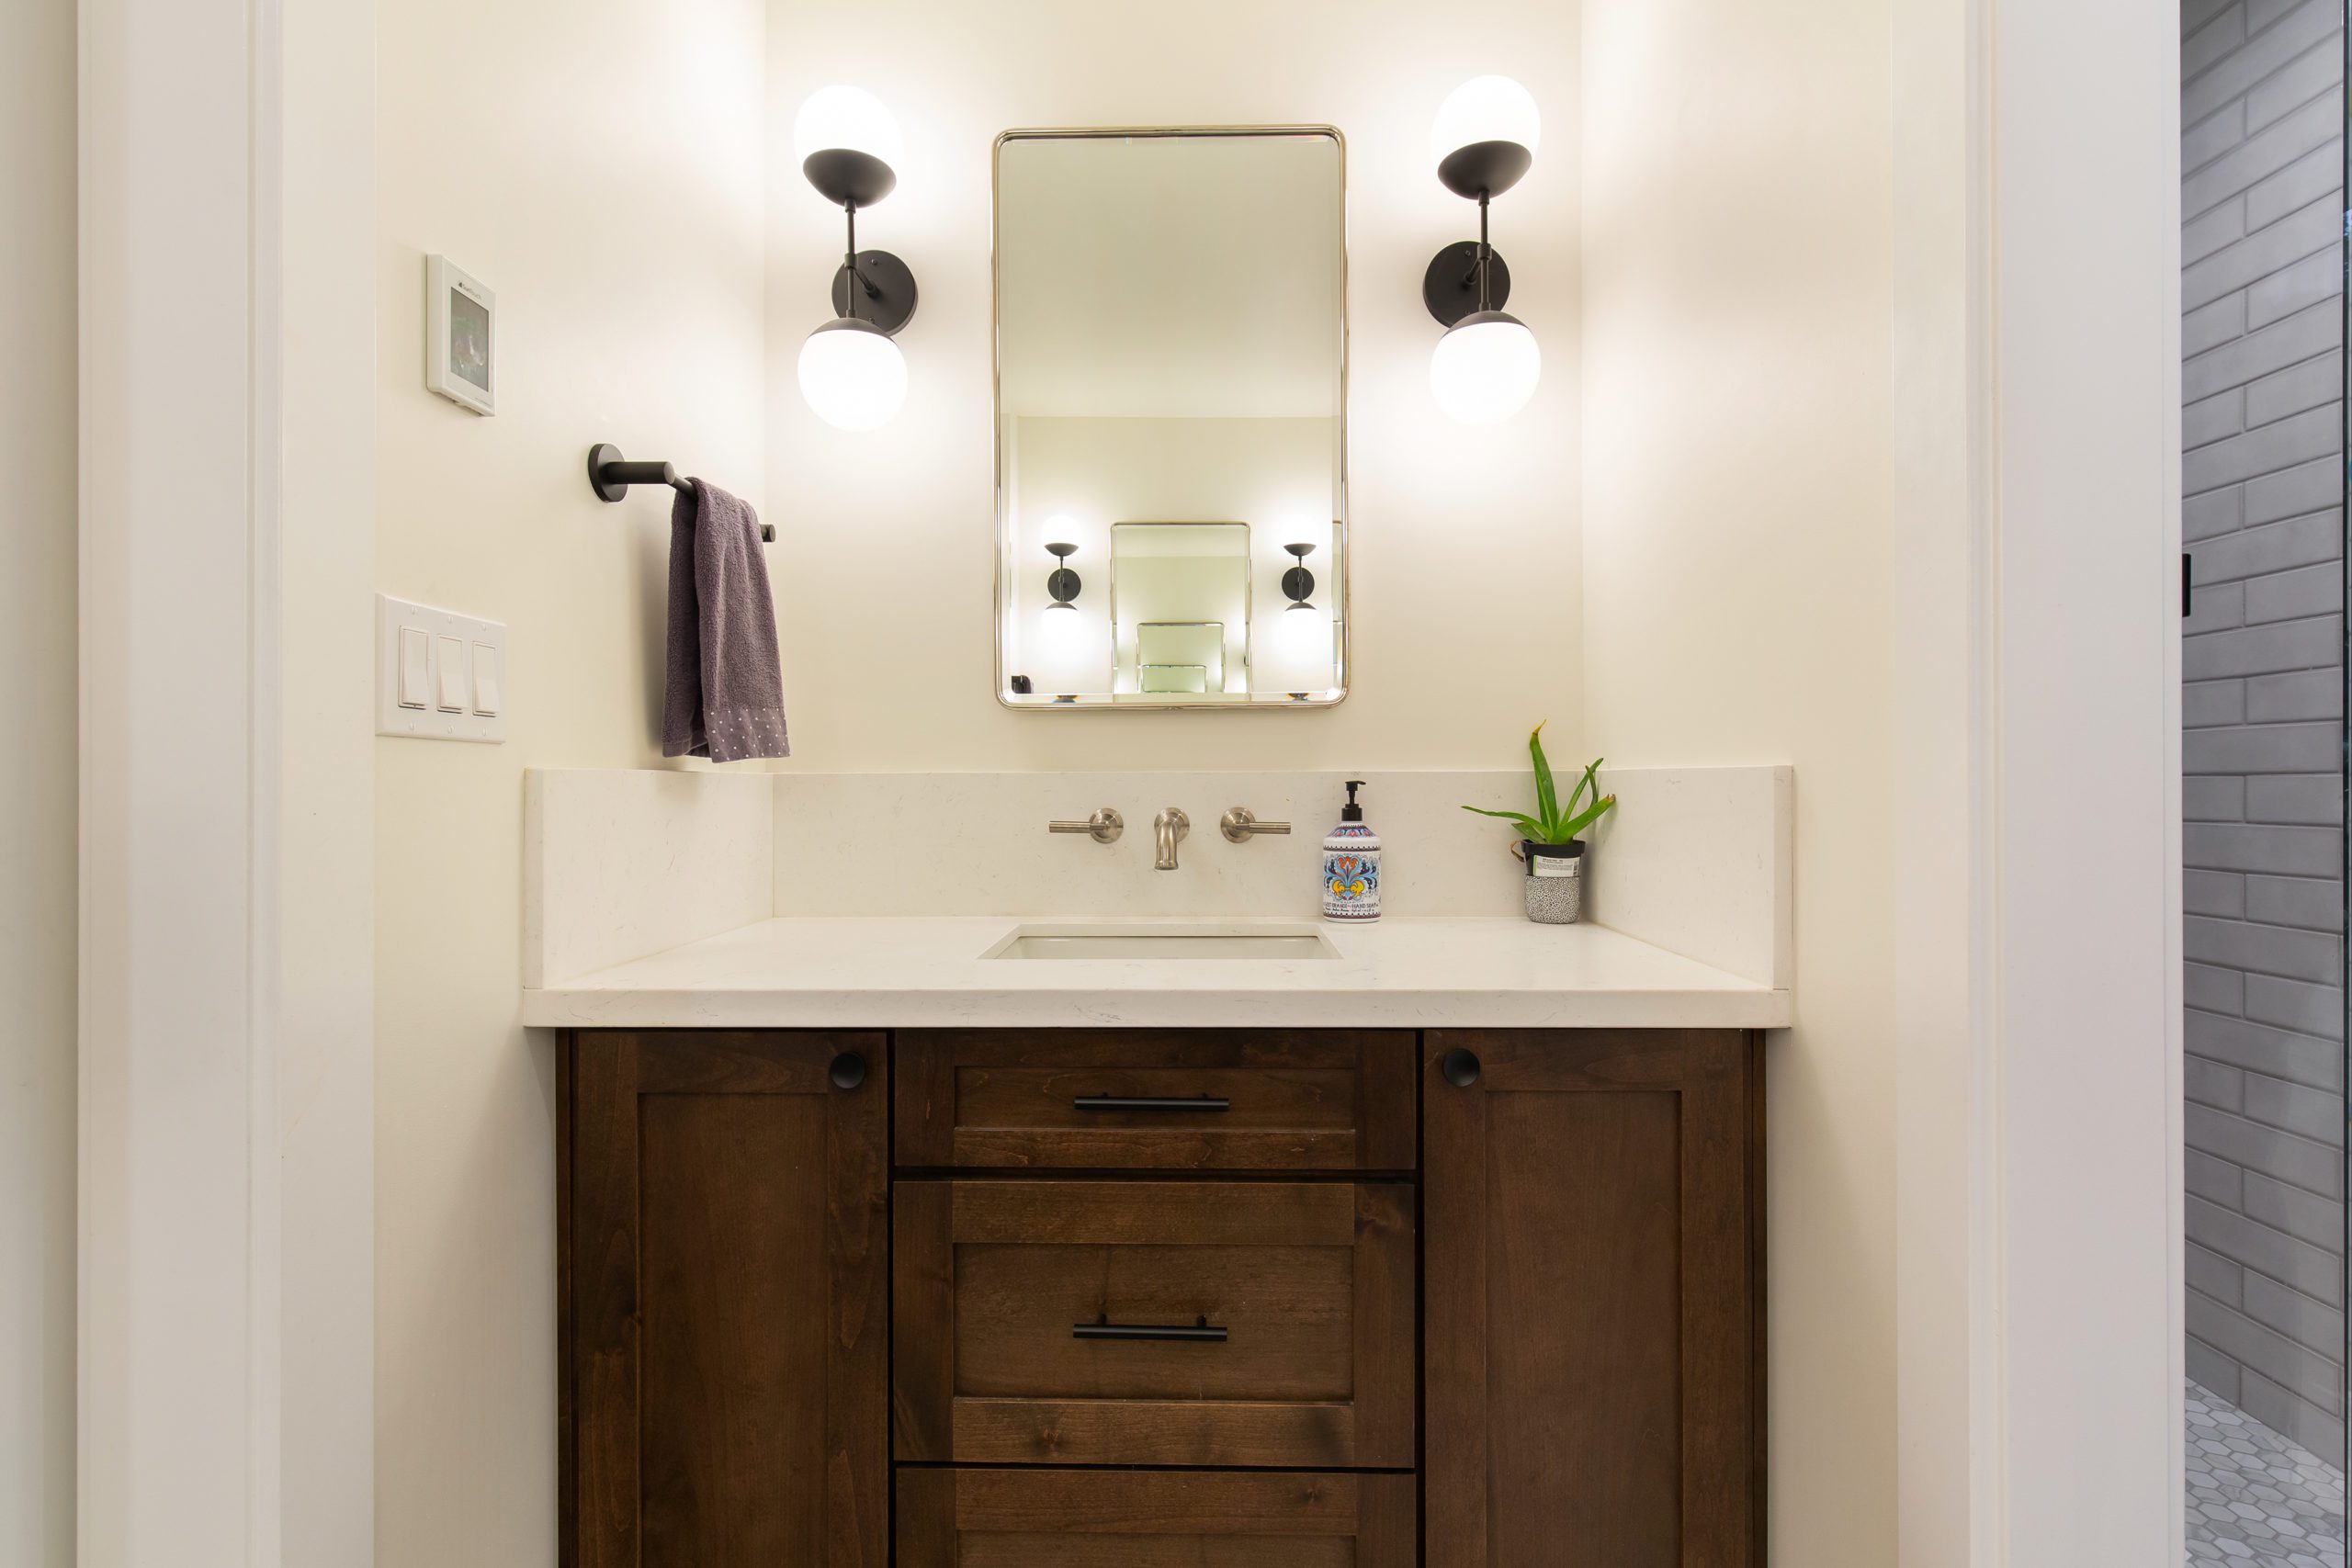 Remodeled bathroom counter with dark cabinetry, white and black light fixtures, white counters and an aloe plant